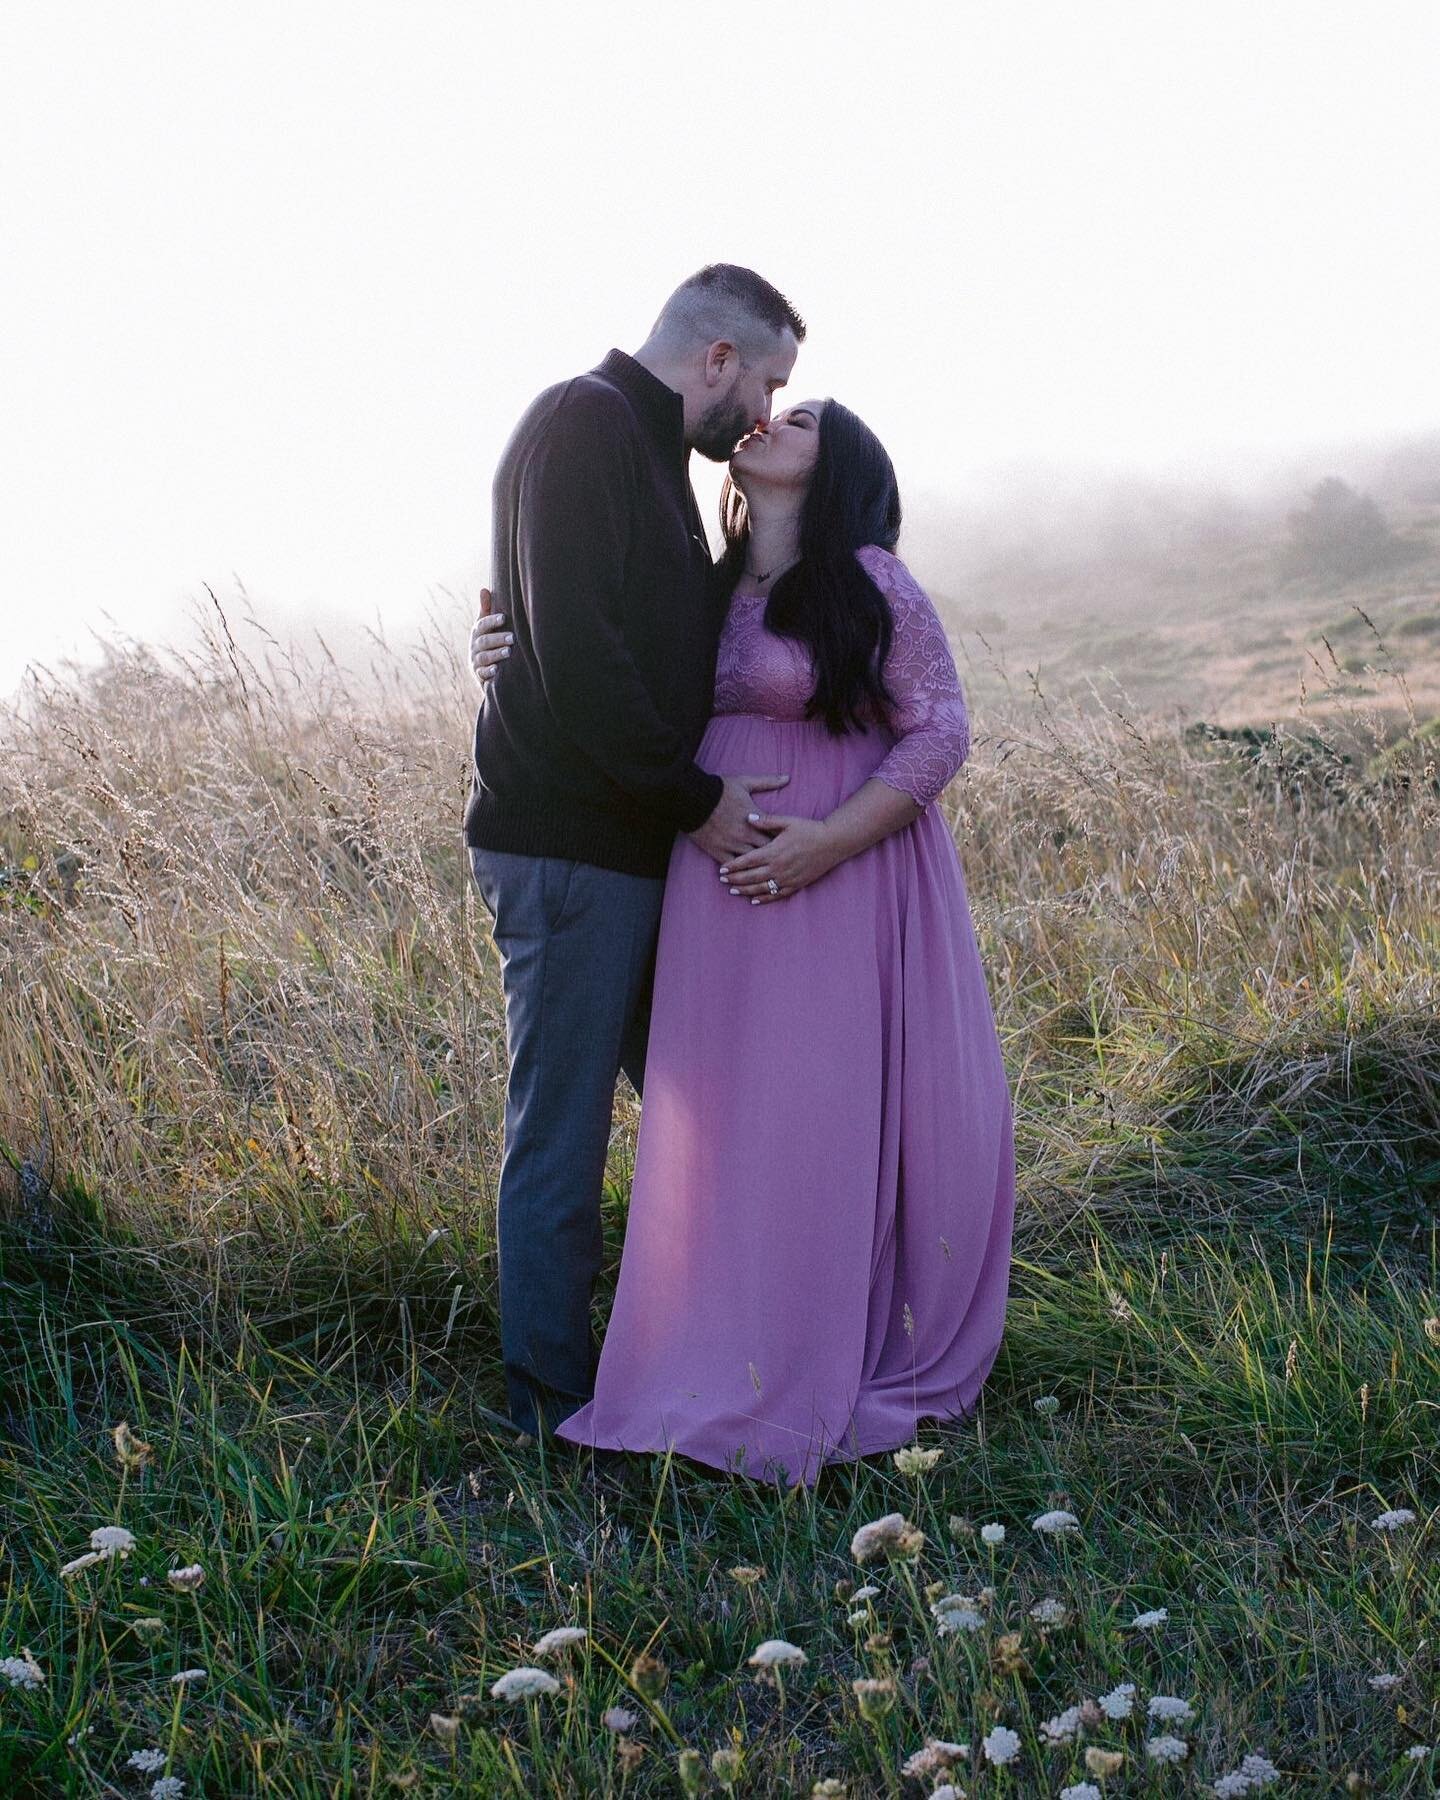 𝖬o𝗎ntains, fo𝗋es𝗍 𝖺nd 𝗌ea! The mo𝗌t perfect location and on𝖾 of my 𝖿avo𝗋𝖺te places on earth! #Maternity #OregonCoast #SouthernOregonPhotographer #MaternityShoot #familyphotographer #OregonCoastPhotographer